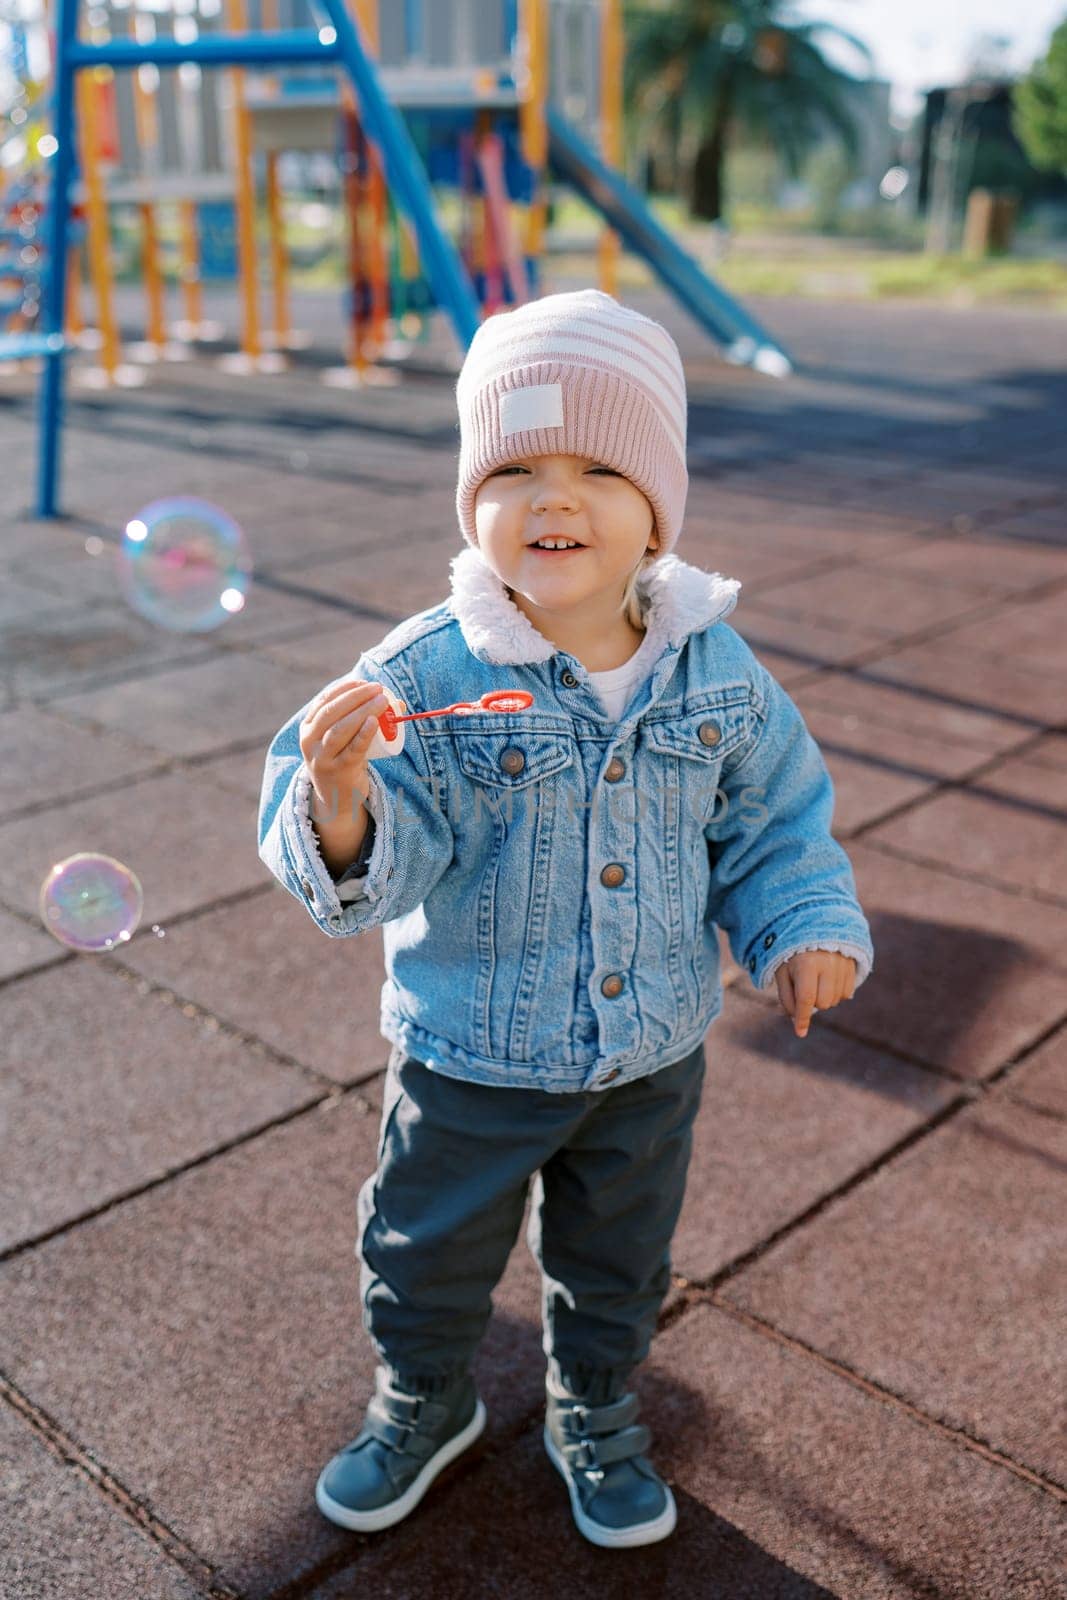 Little smiling girl blowing soap bubbles on the playground. High quality photo